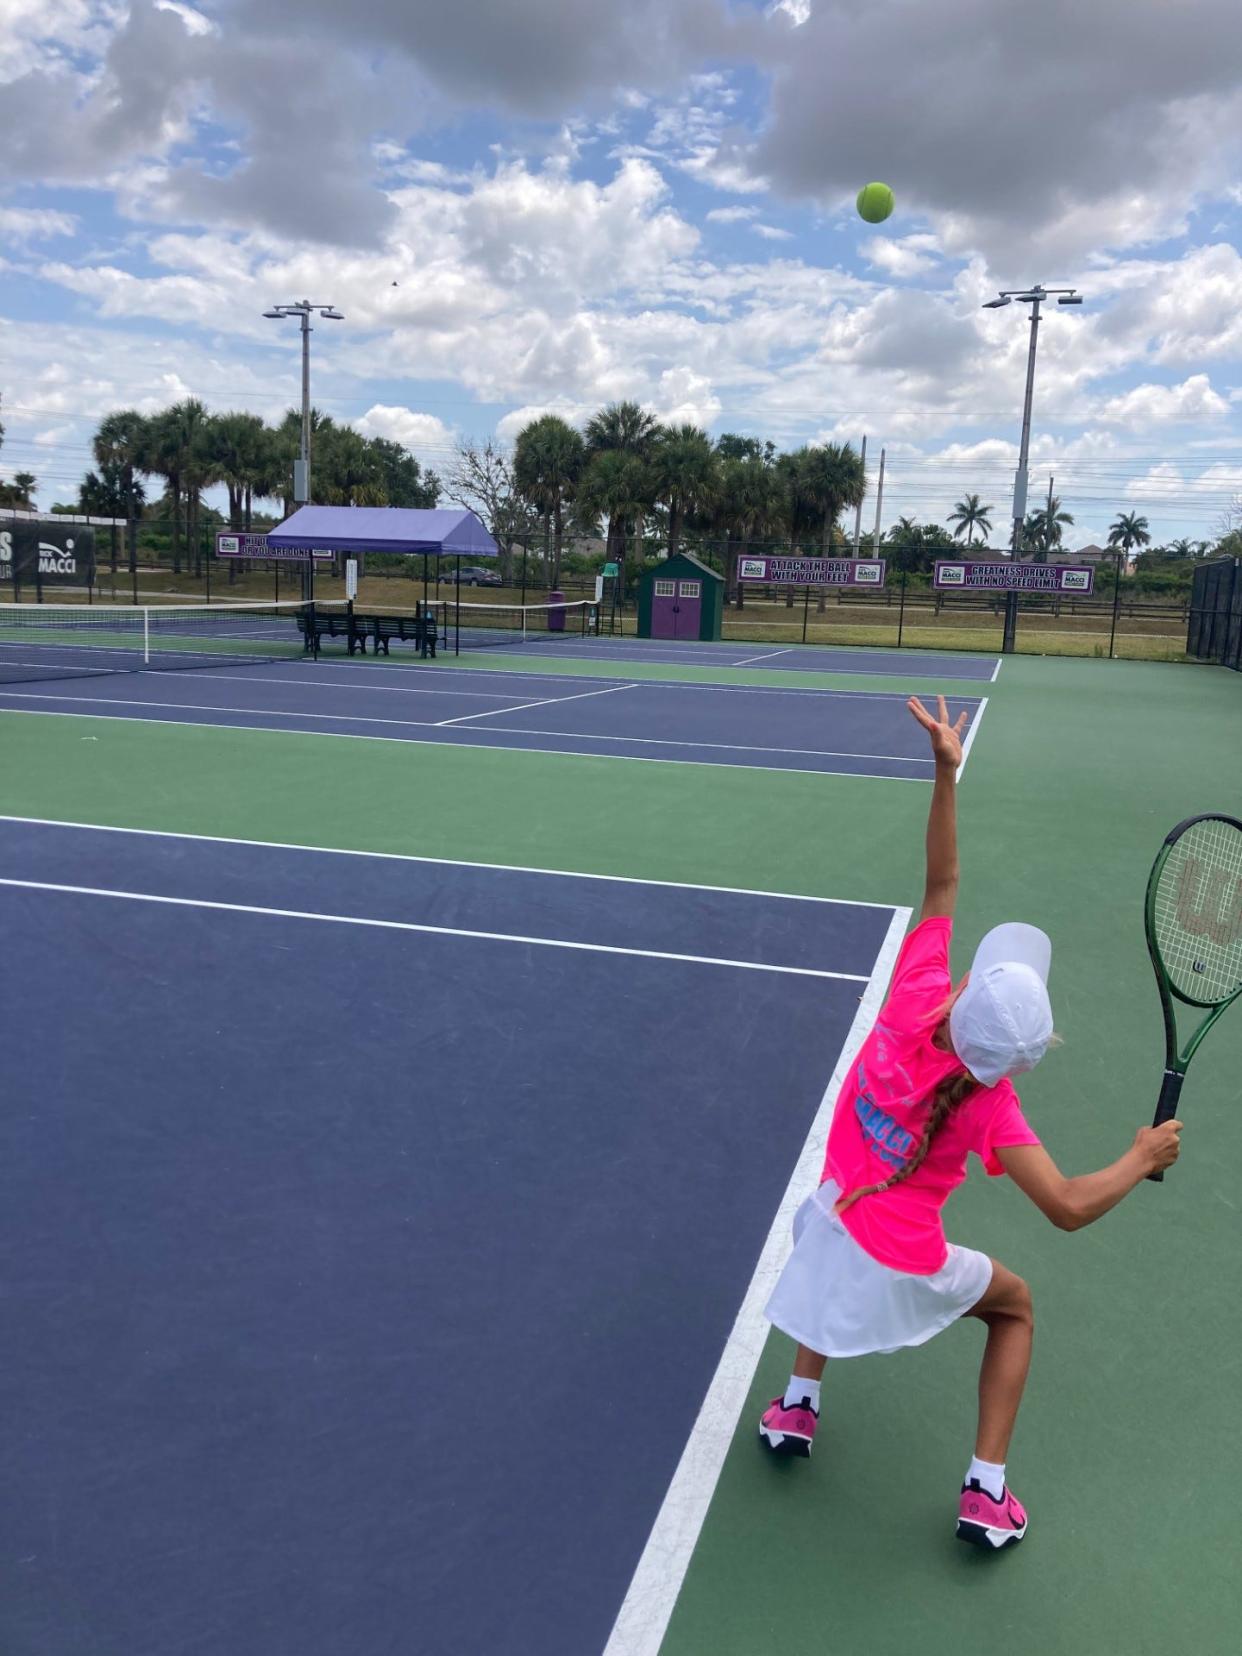 Vlade Hrancher, 8, gets ready to serve during a training session at Boca Raton's Rick Macci Tennis Academy.